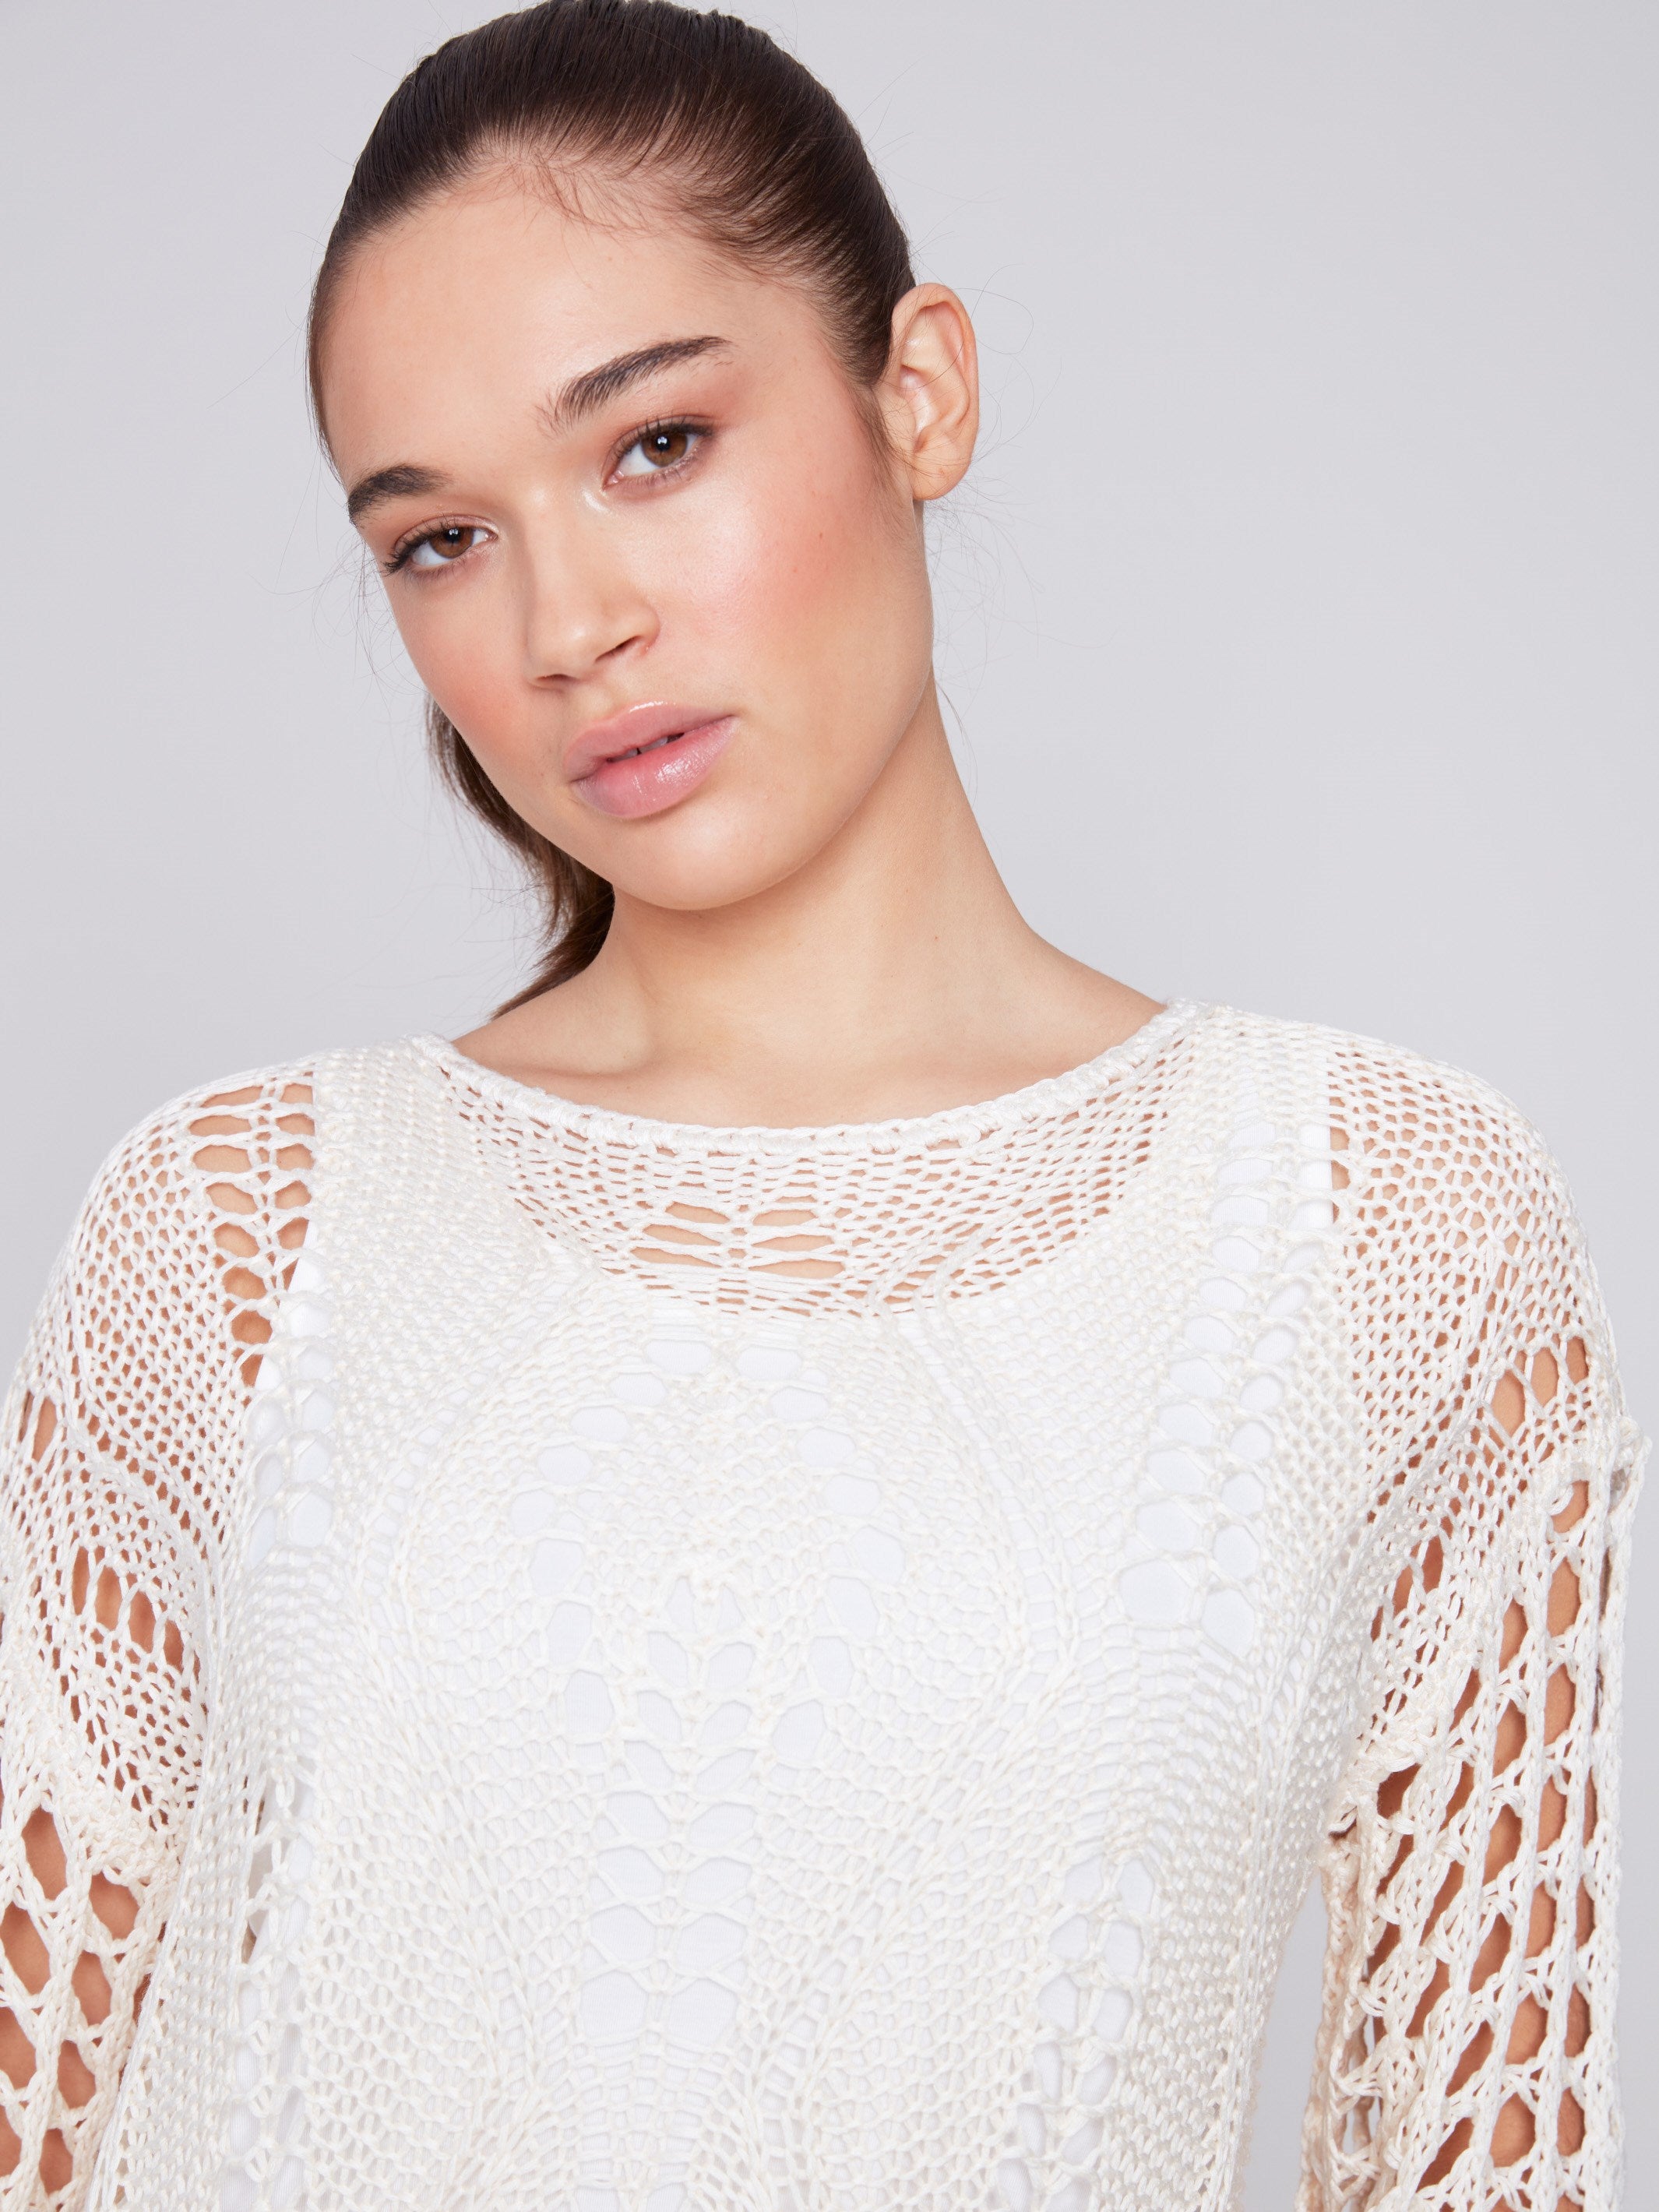 Fancy Stitch Crochet Sweater - Natural - Charlie B Collection Canada - Image 4